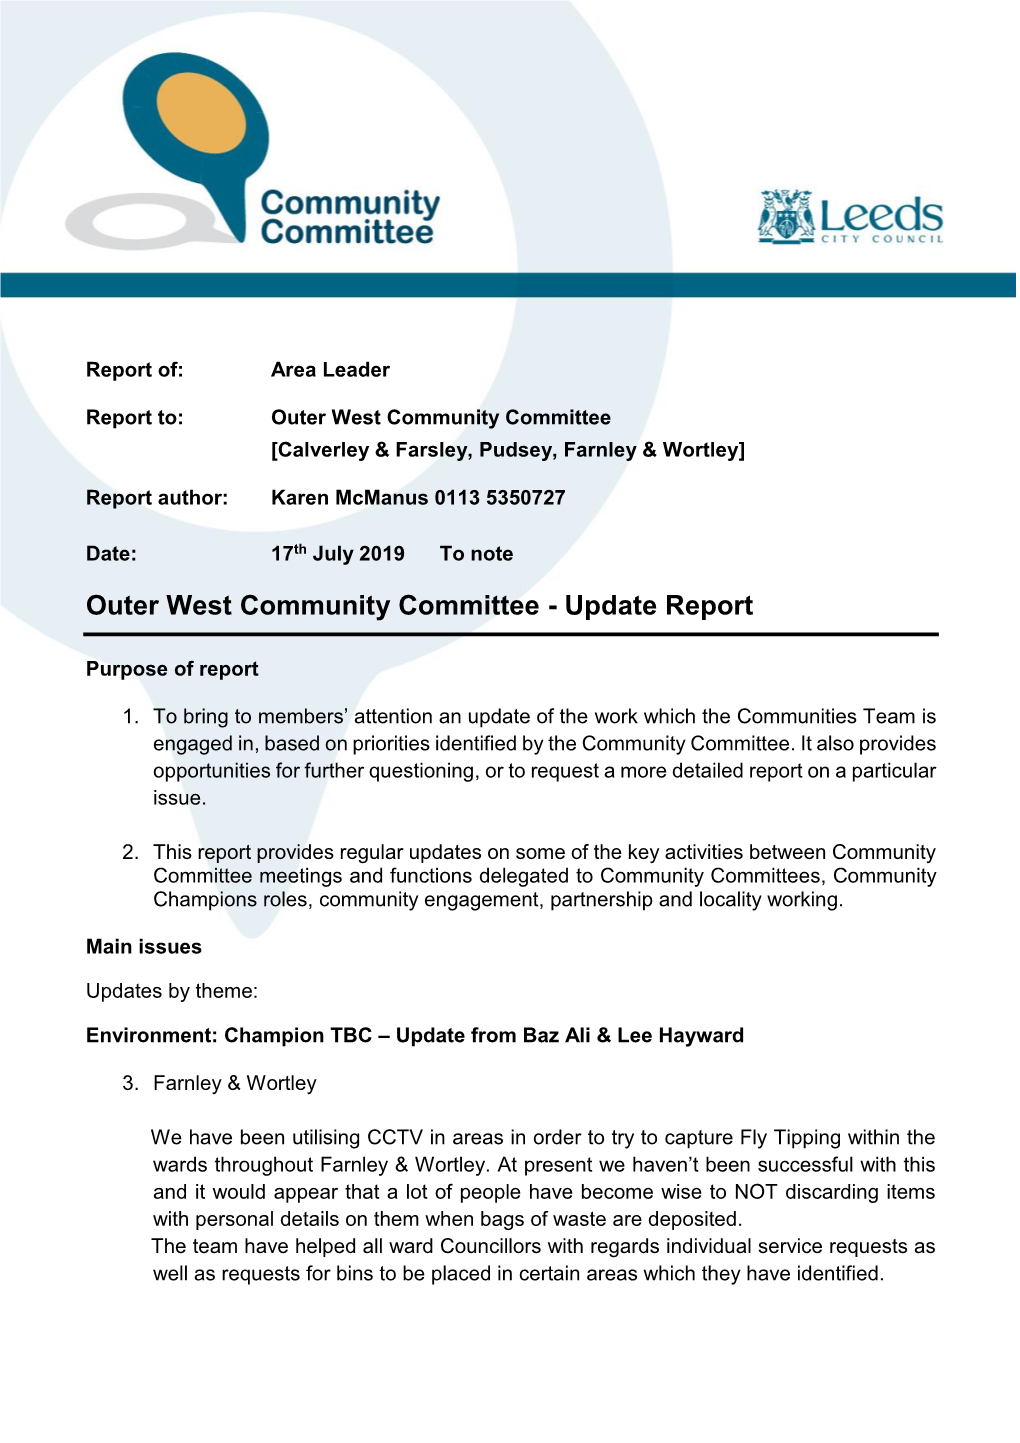 Outer West Community Committee [Calverley & Farsley, Pudsey, Farnley & Wortley]